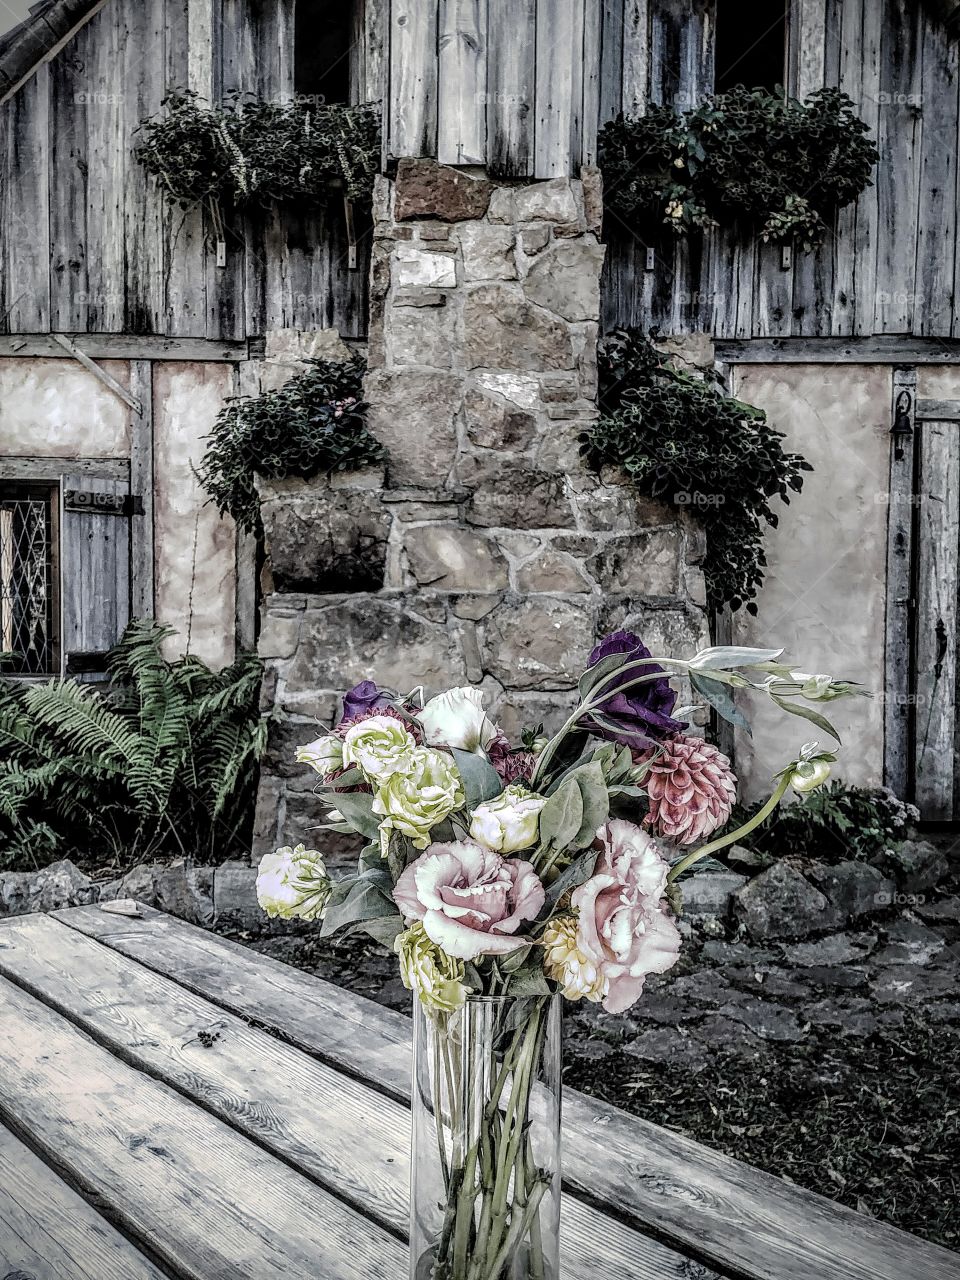 Flowers & The Chimney